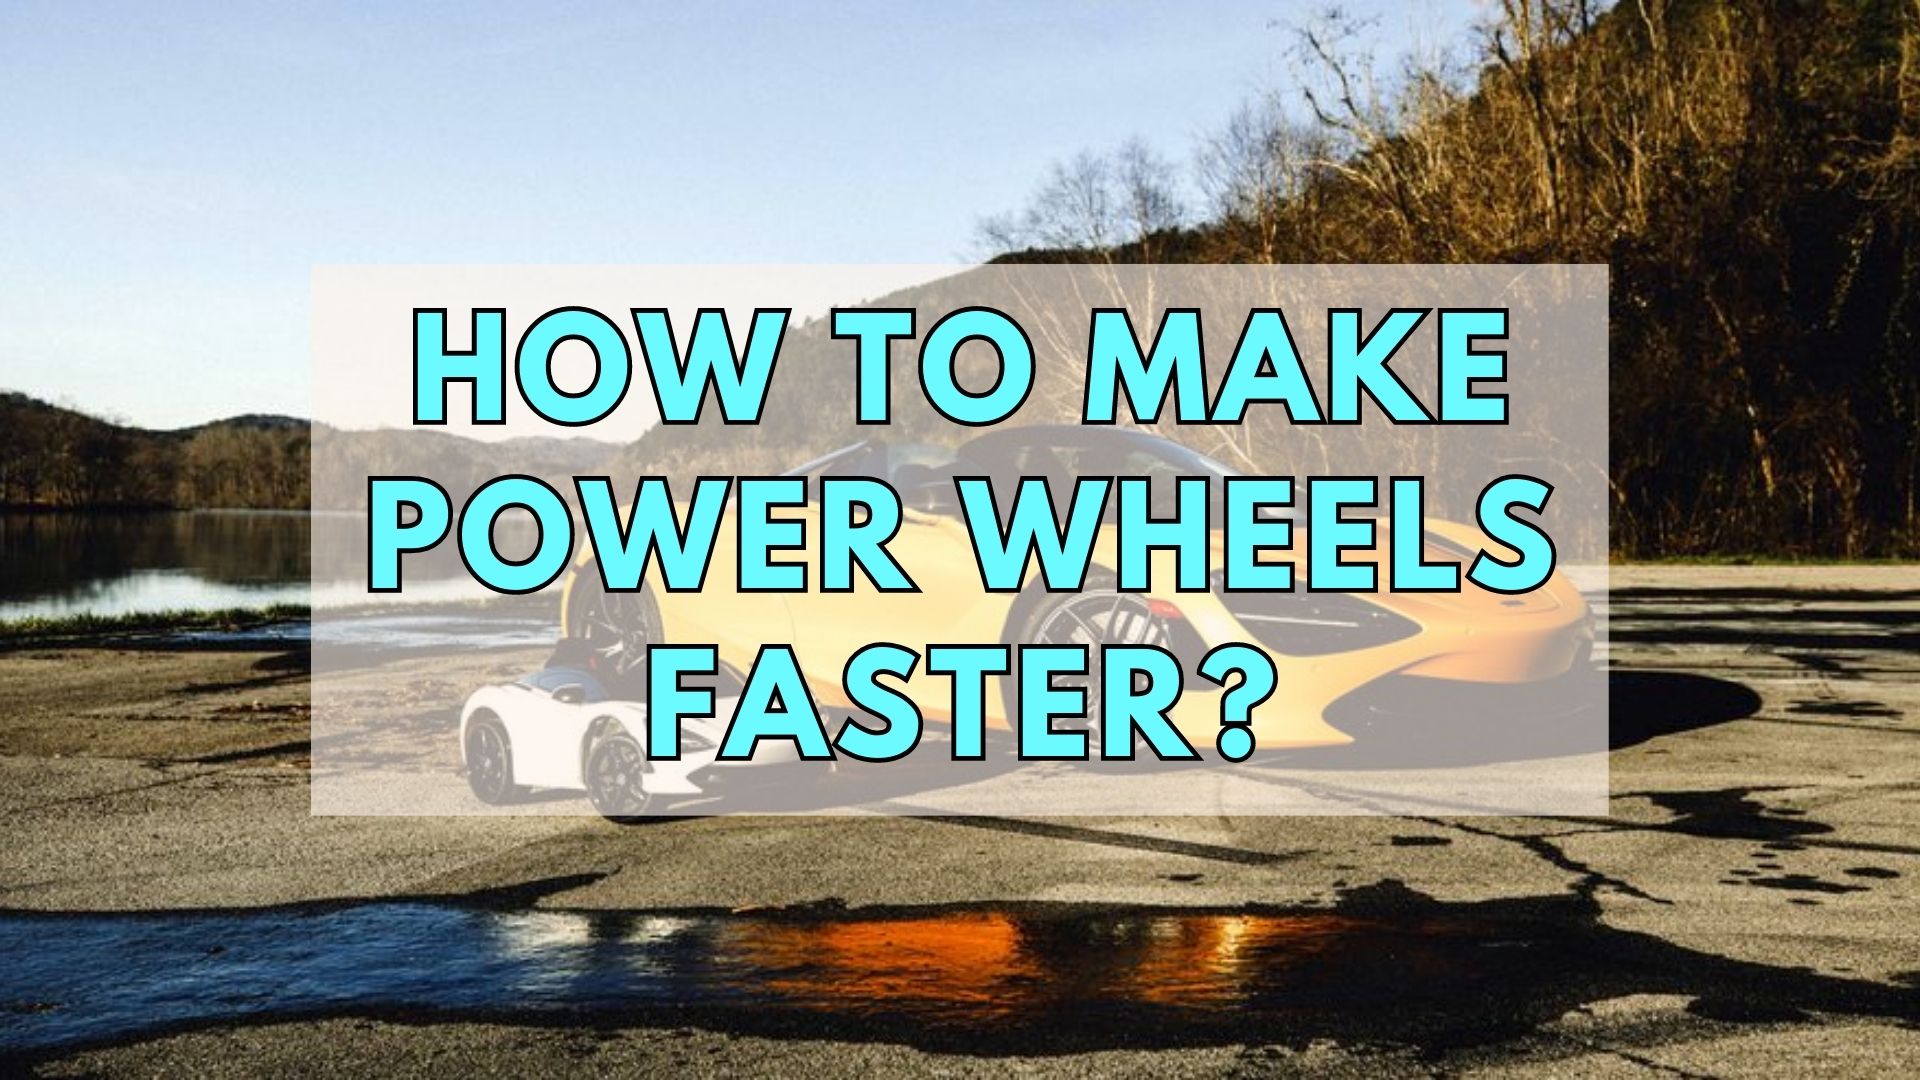 How To Make Power Wheels Faster